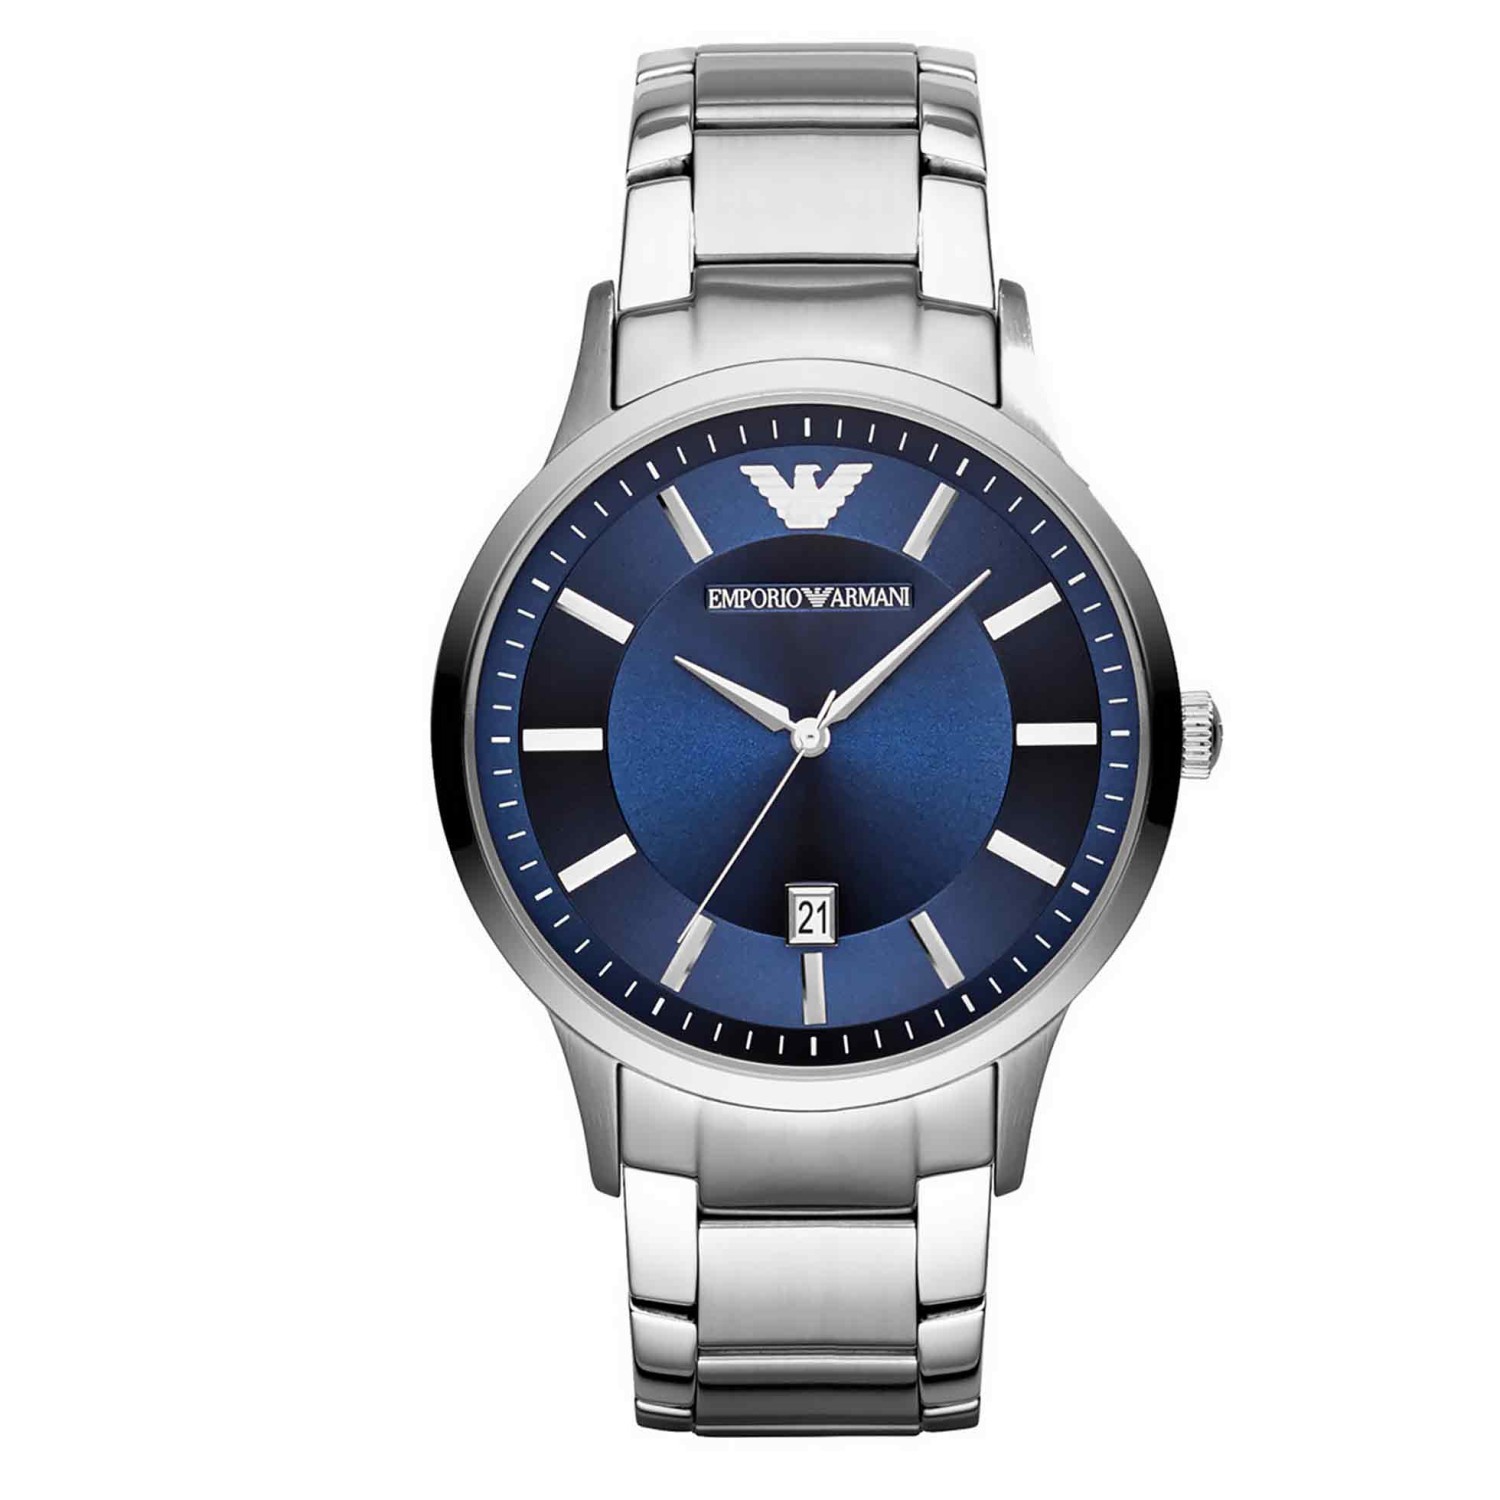 AR11180 Emporio Armani Mens Watch. A bold navy blue dial and polished and brushed bracelet delivers stylish simplicity and elegance to this Armani mens watch.3 Months No Payments and Interest for Q Card holders Oxipay is simply the easier way to pay - use